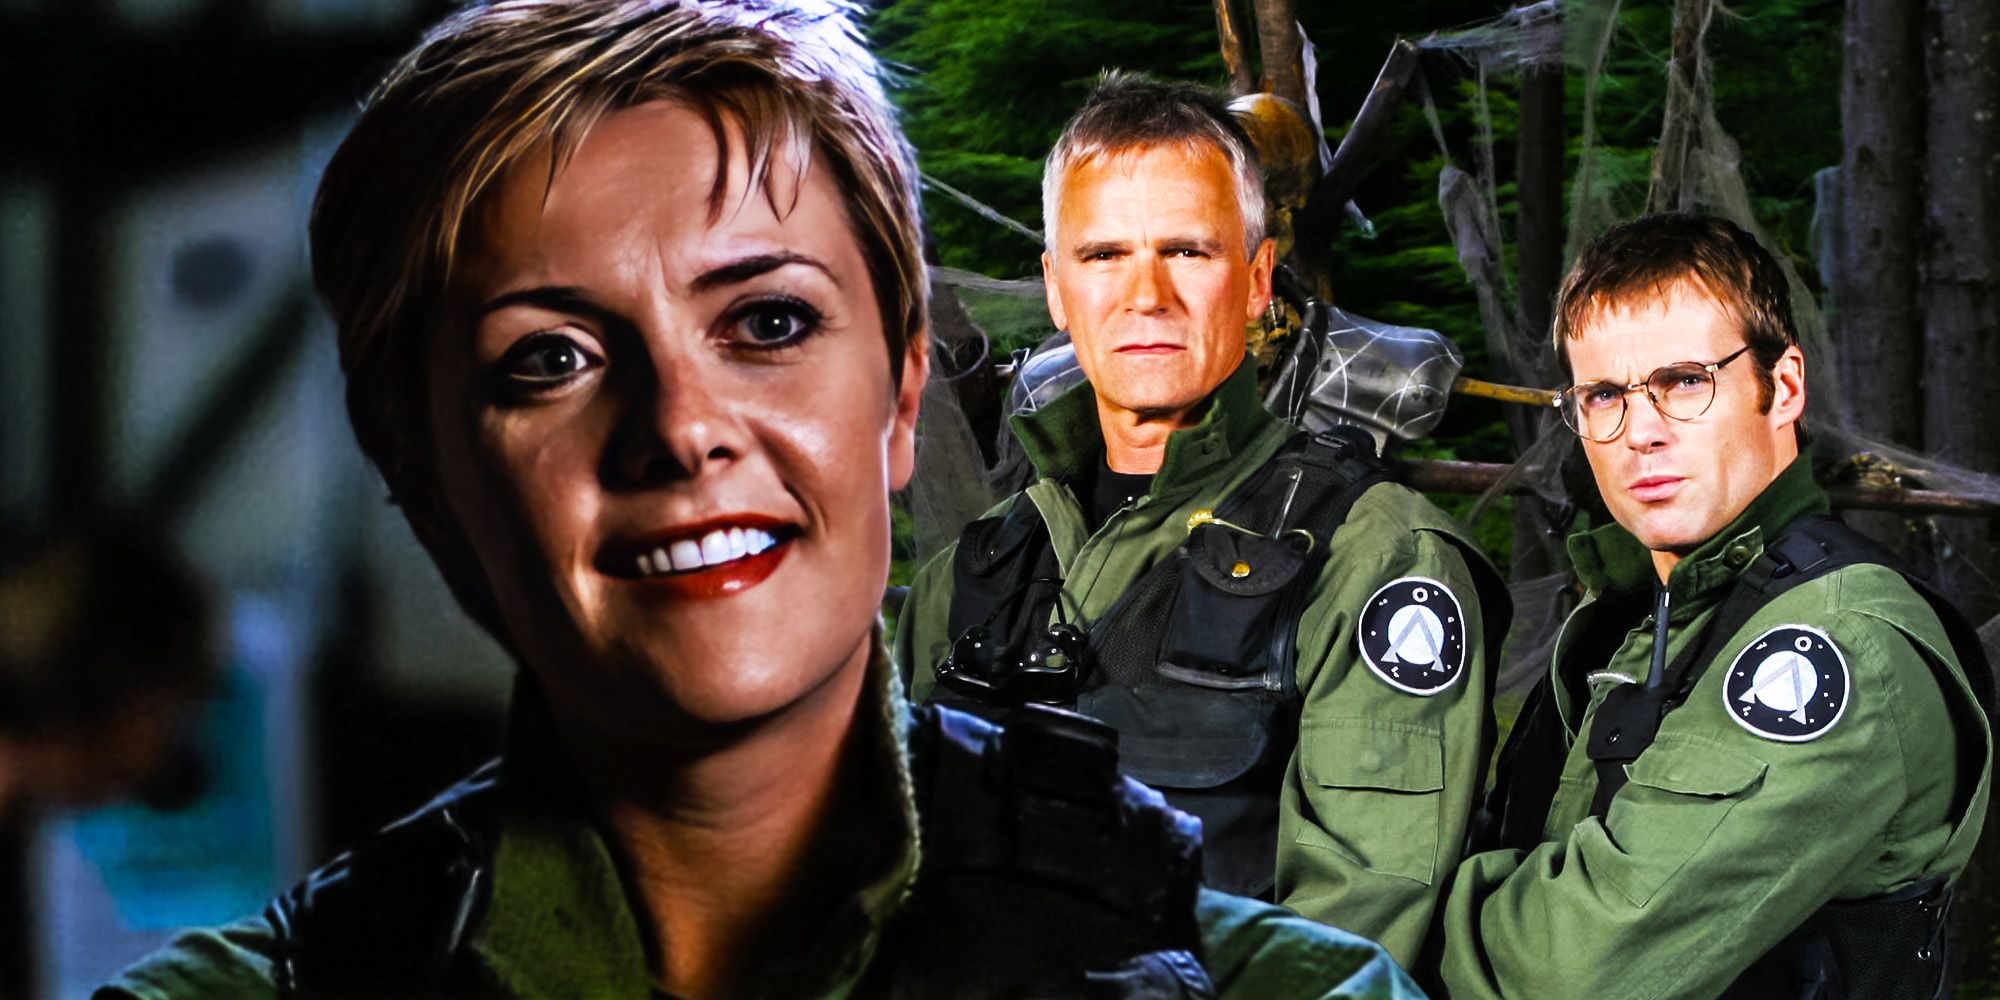 SG 1 Stargate spinoff carter and Oneill